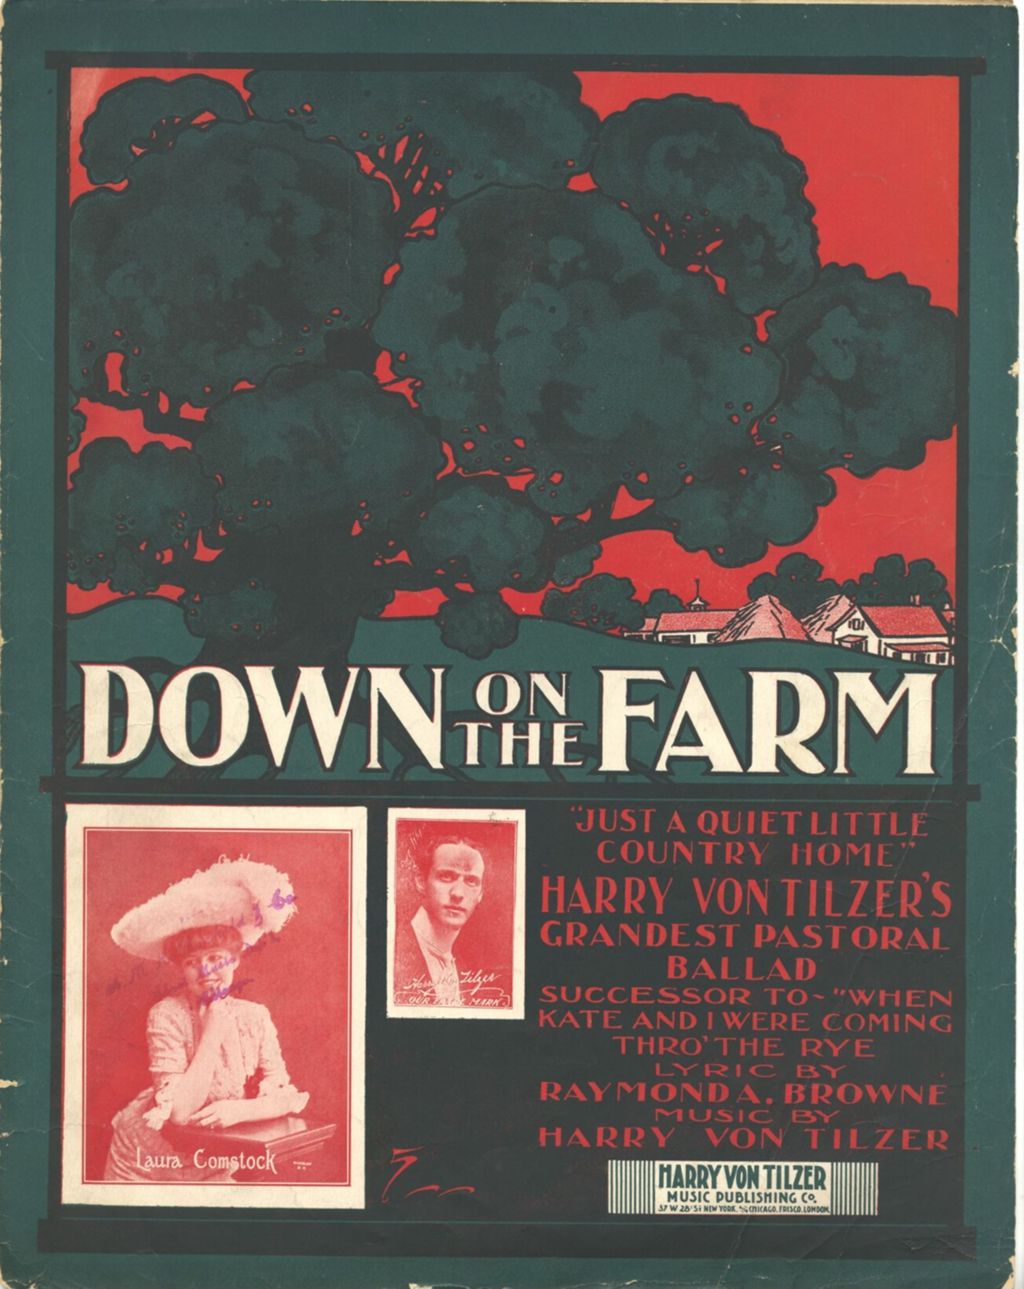 Miniature of Down on the Farm